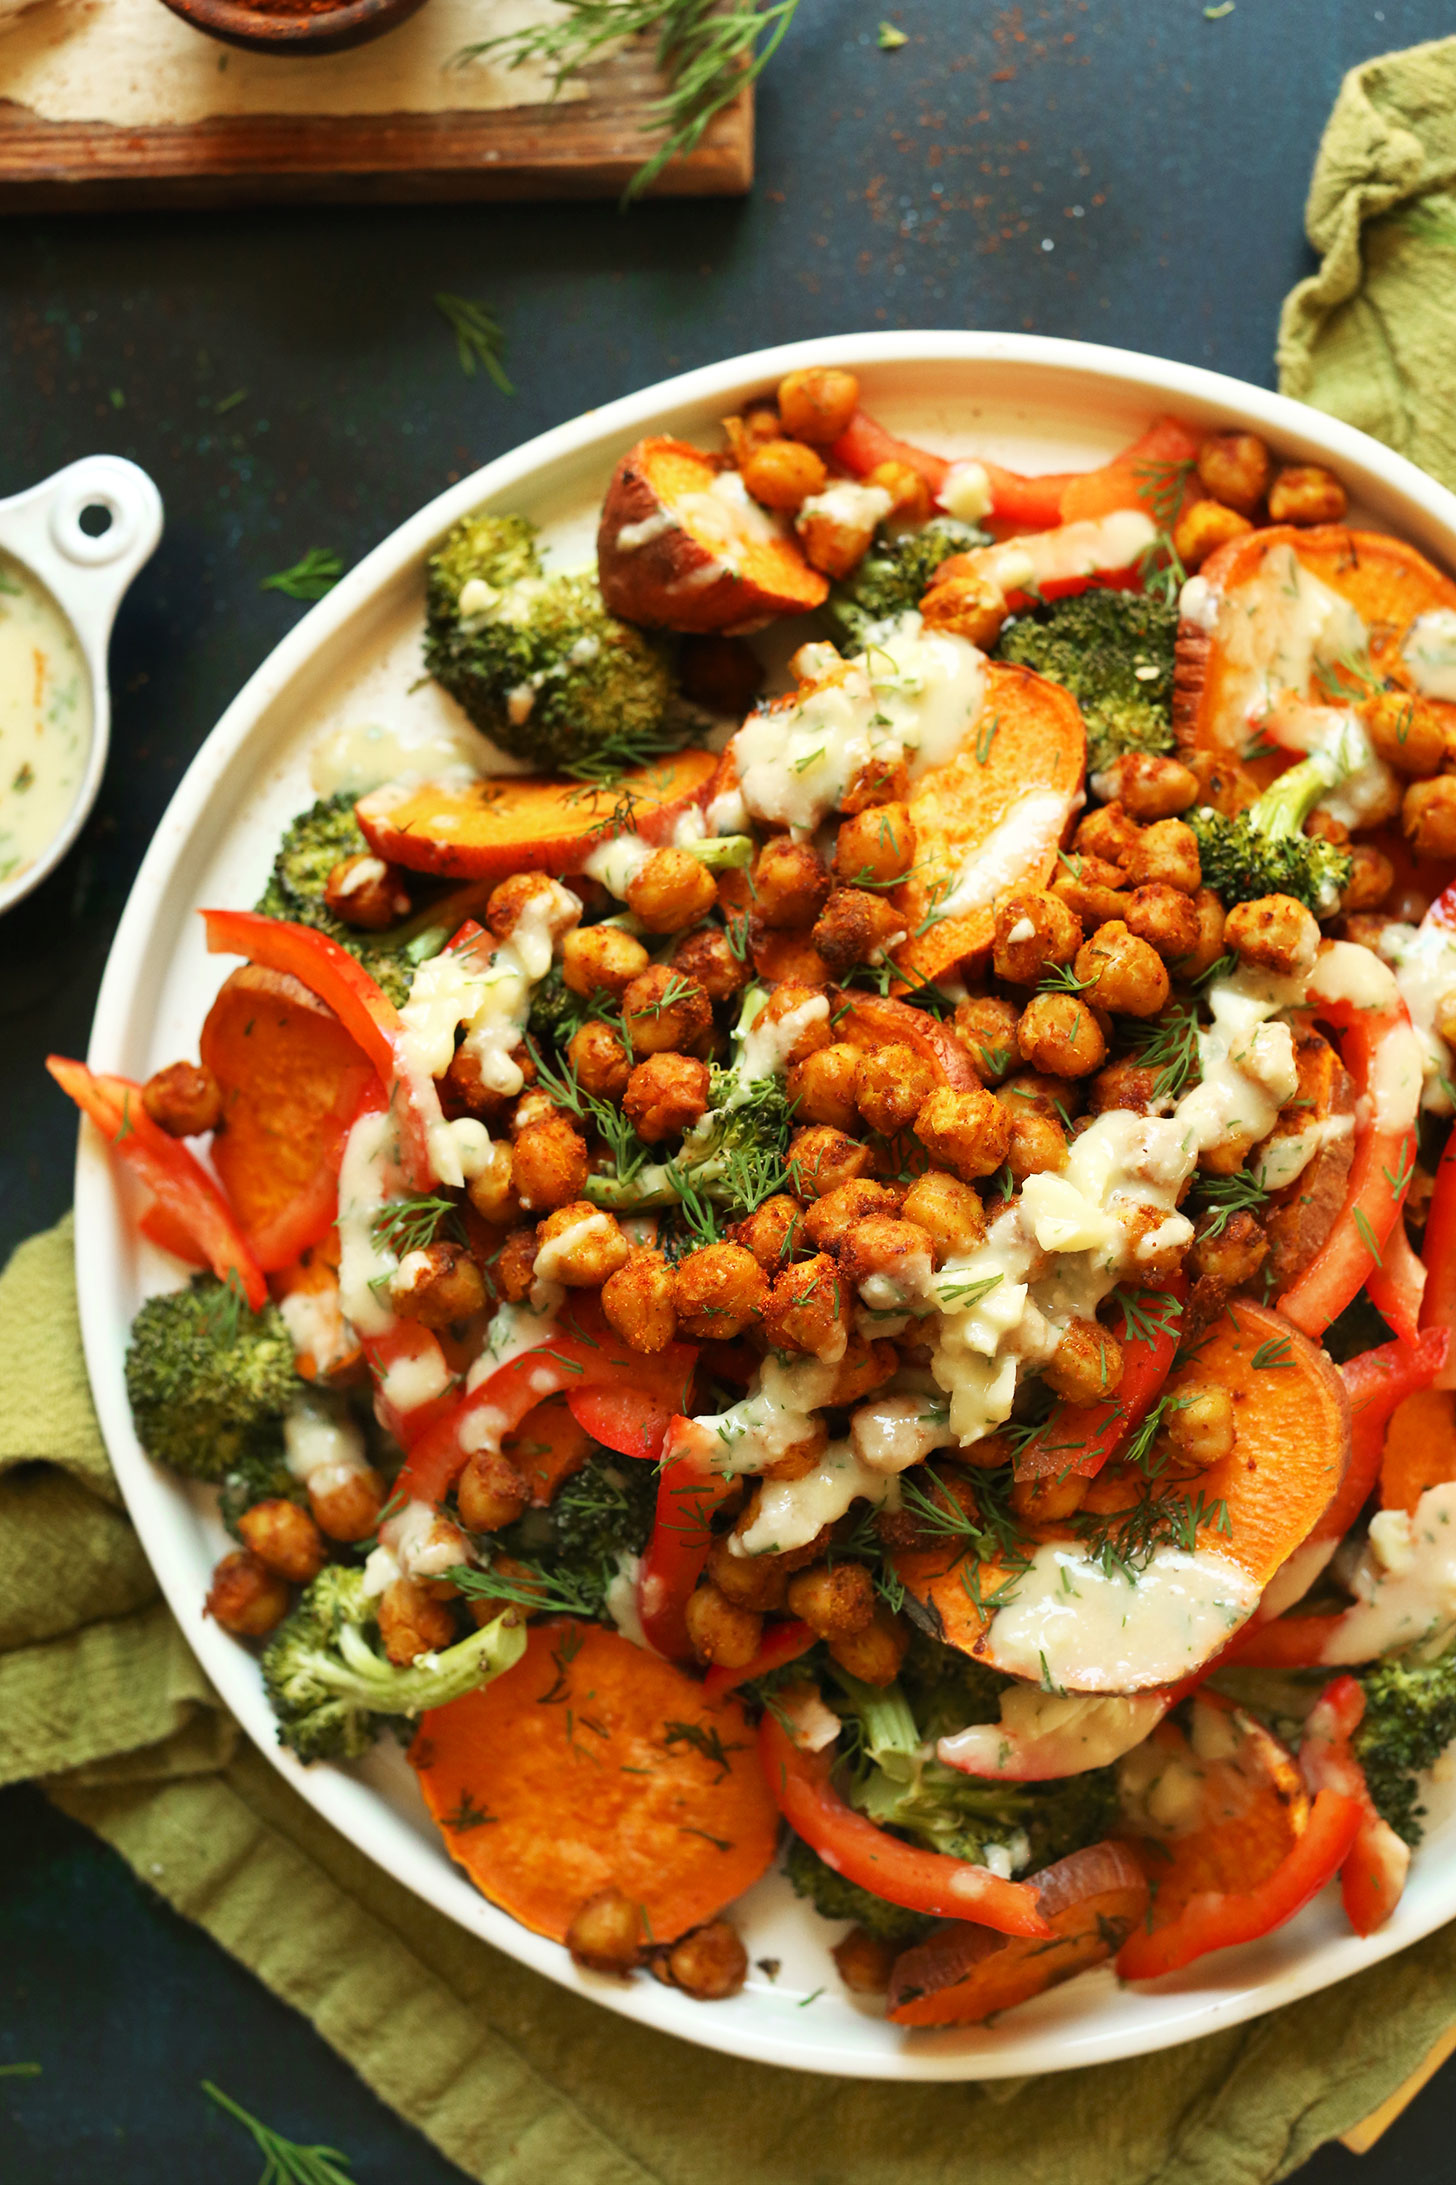 HEALTHY-30-minute-Broccoli-Sweet-Potato-Chickpea-Salad-with-a-simple-Garlicl-Dill-Sauce-vegan-glutenfree-dinner-healthy-recipe